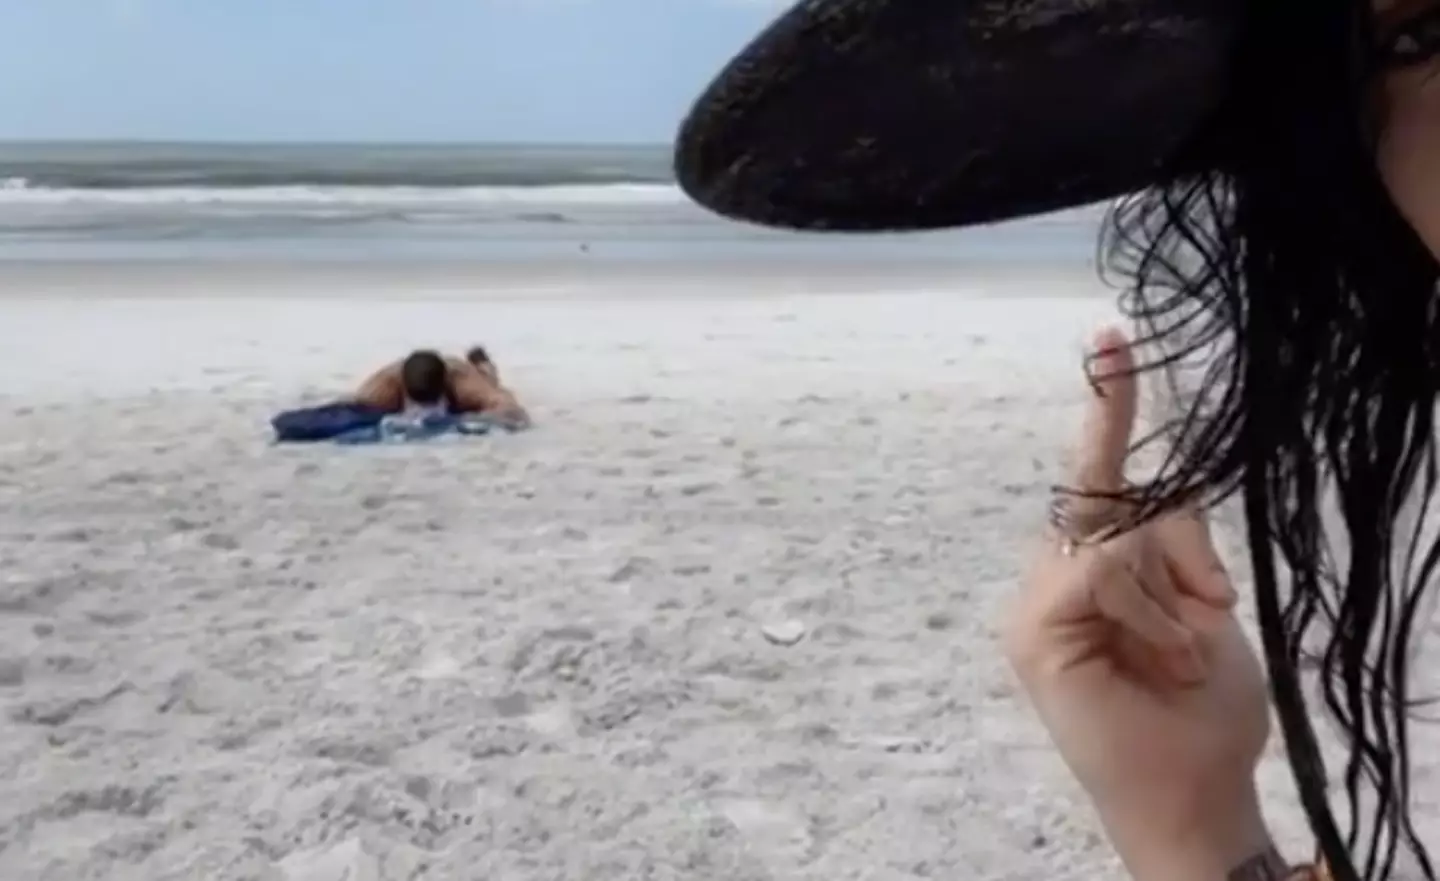 The woman wasn't happy that the sunbather decided to lay 10ft away from her on an empty beach.